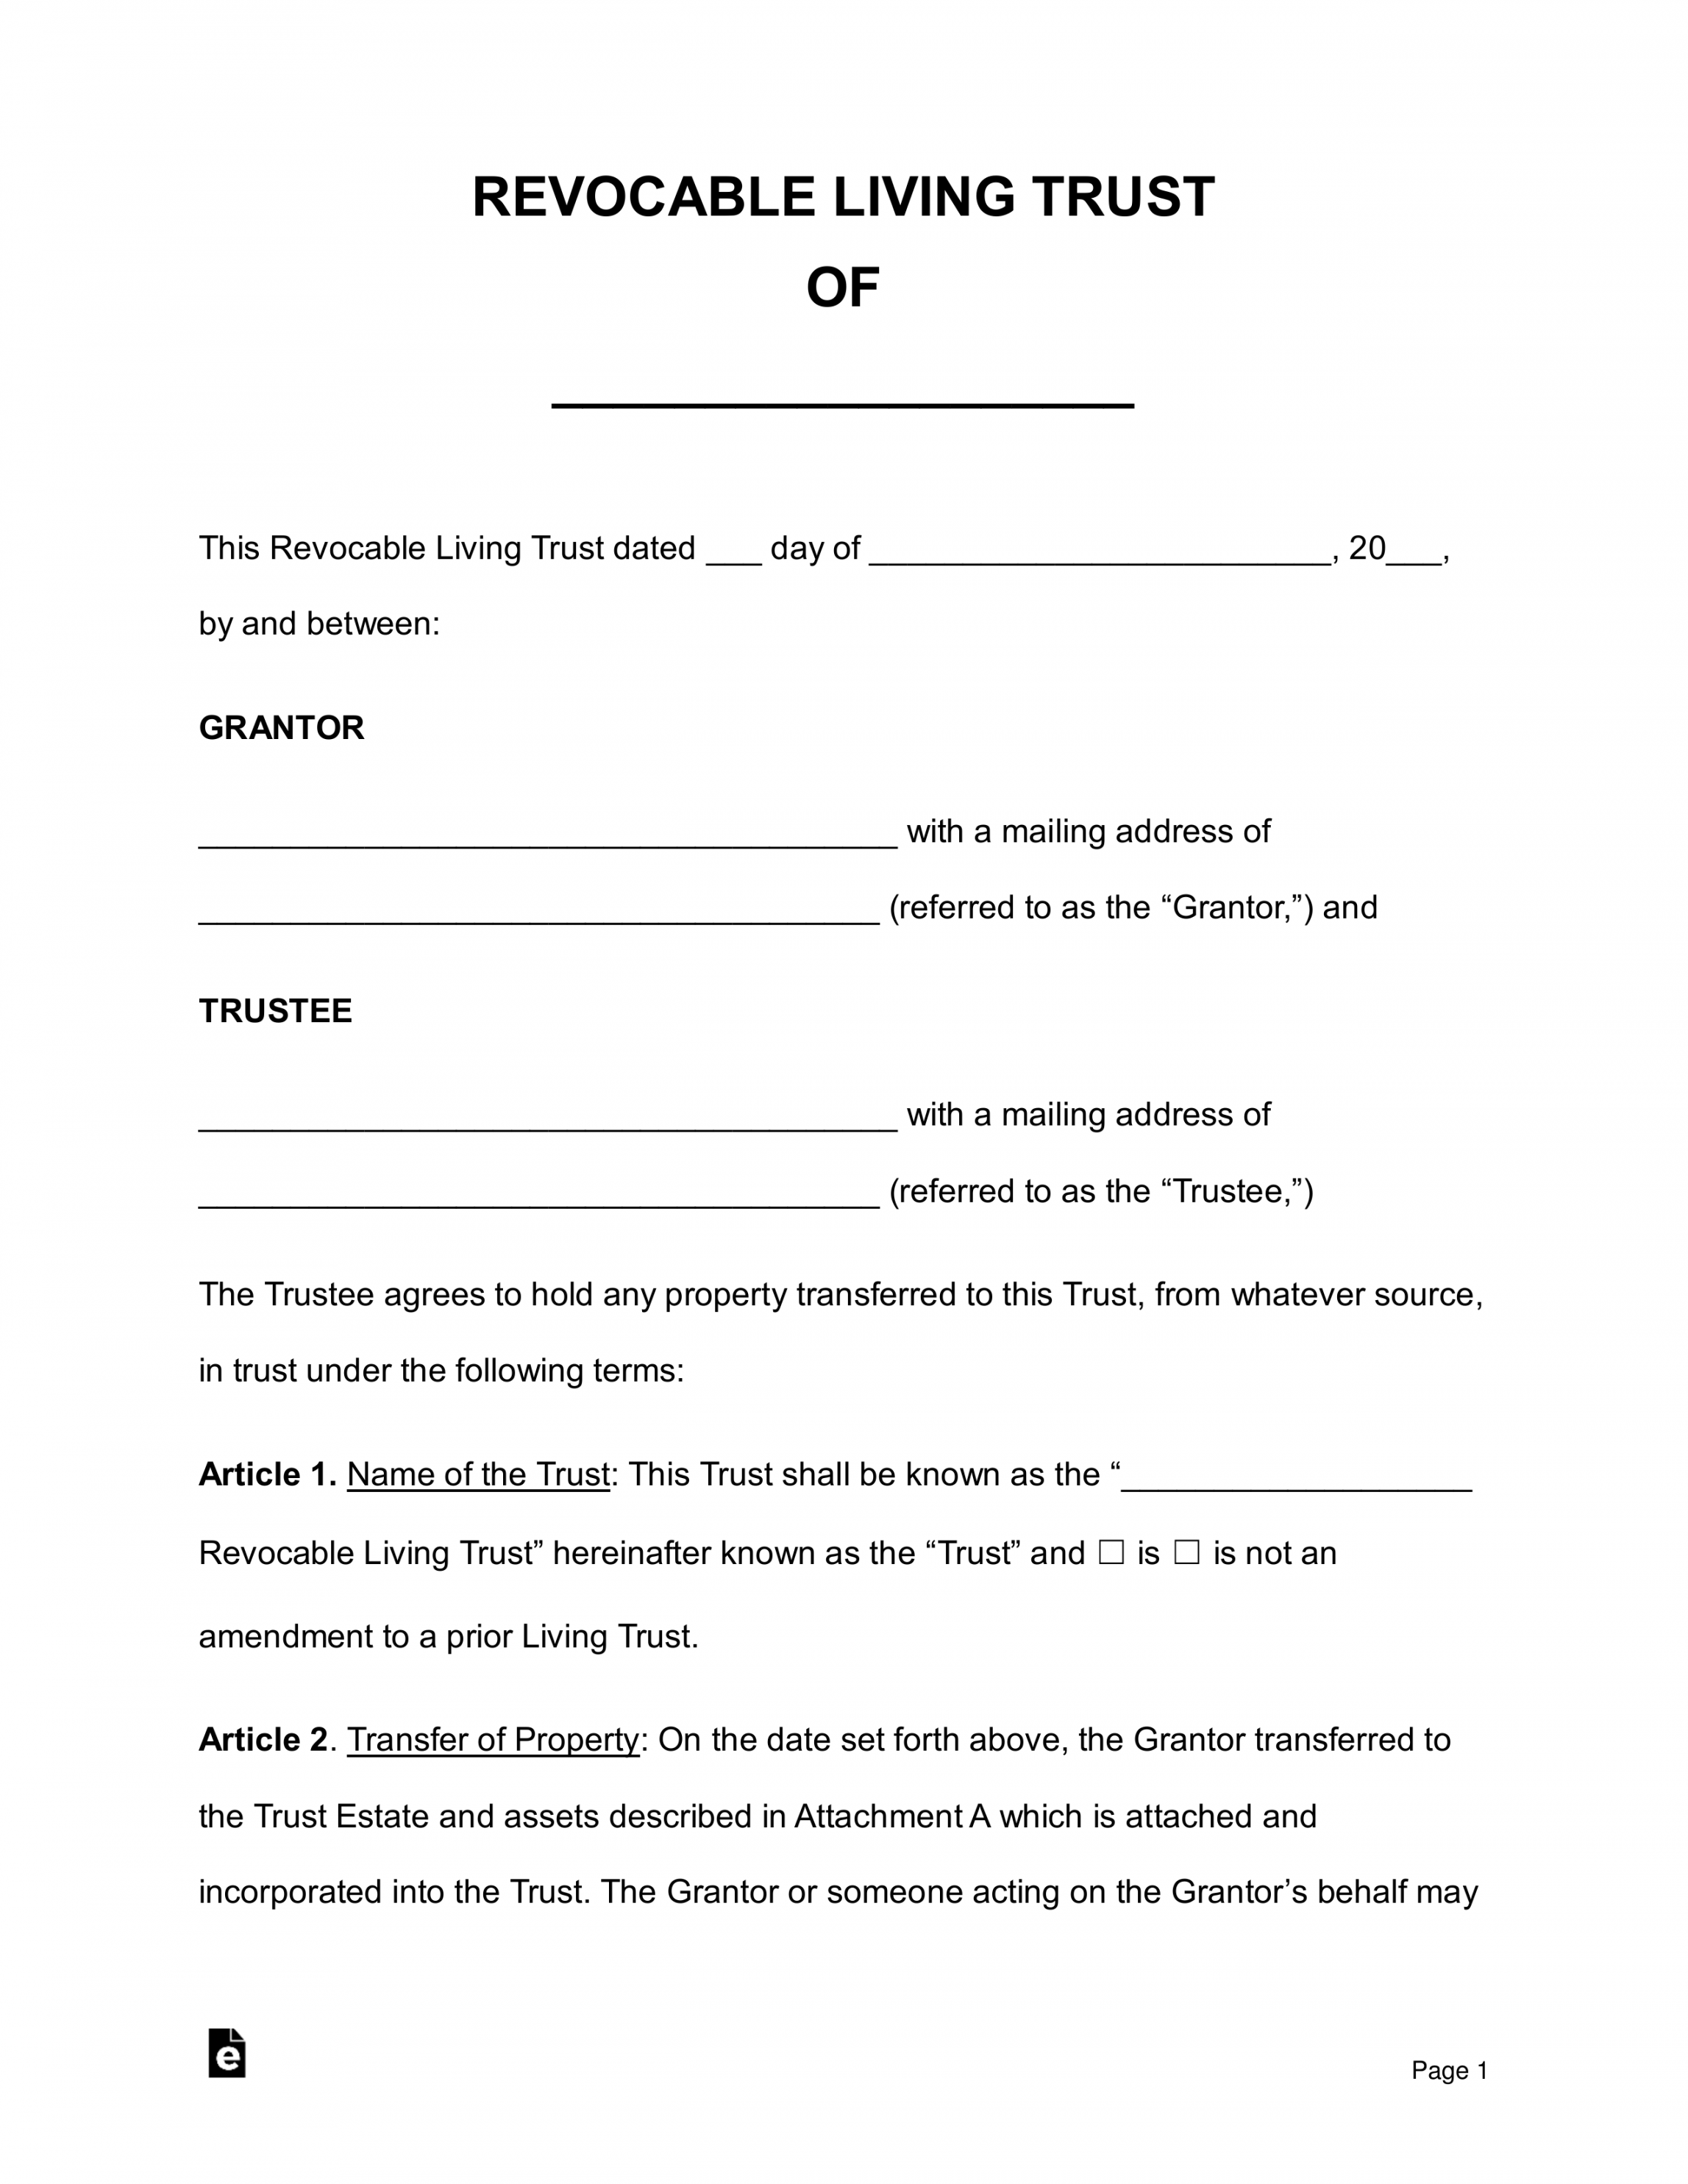 Free Revocable Living Trust Forms - PDF  Word – eForms - FREE Printables - Free Printable Will And Trust Forms